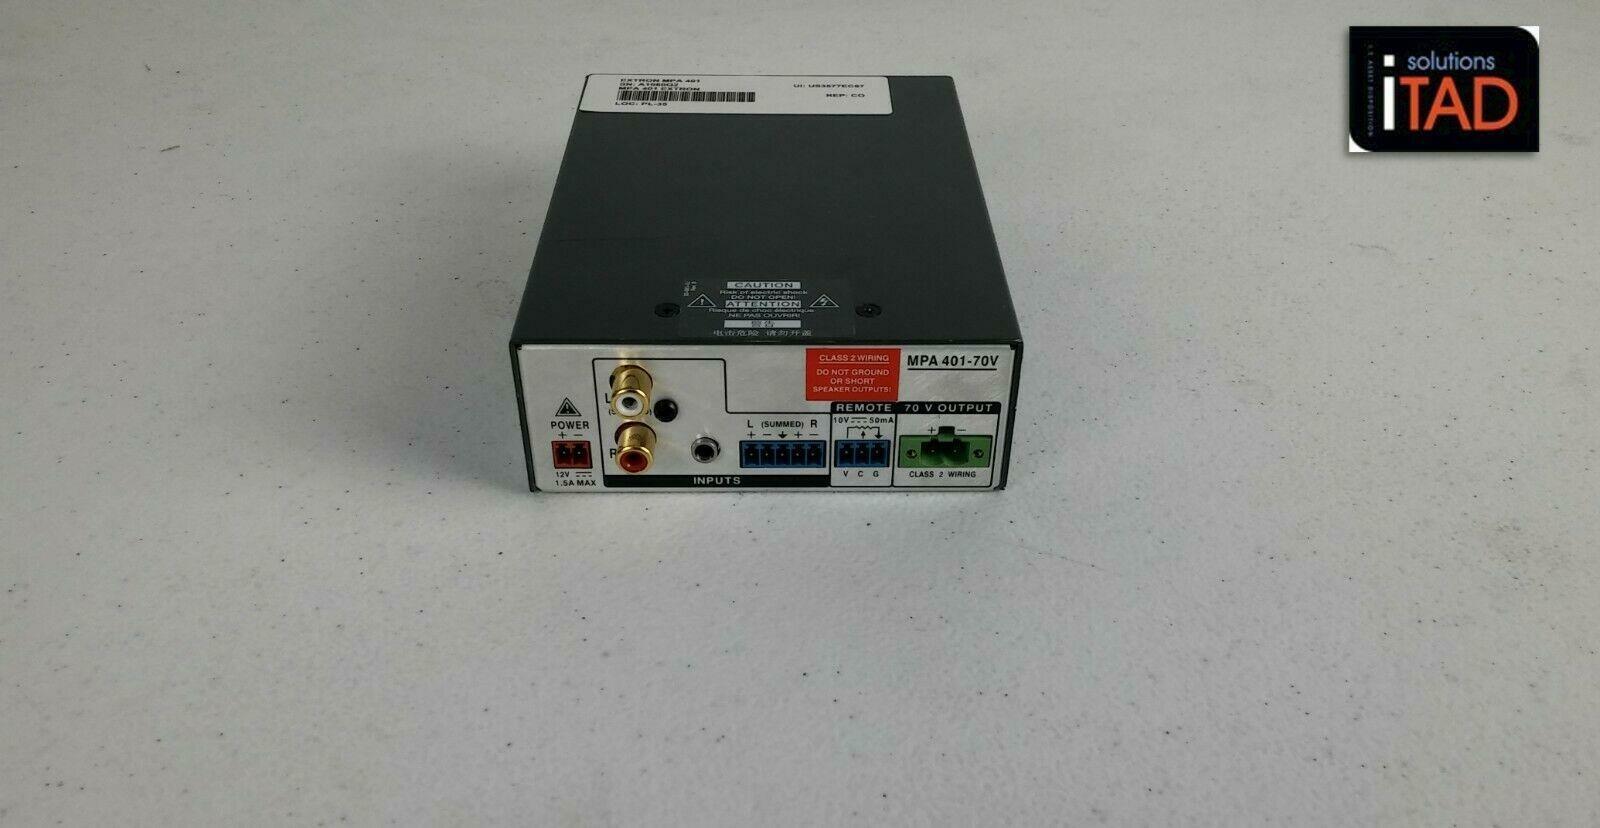 Extron MPA 401-70V Mini Power Amplifier, Power Adapter NOT INCLUDED